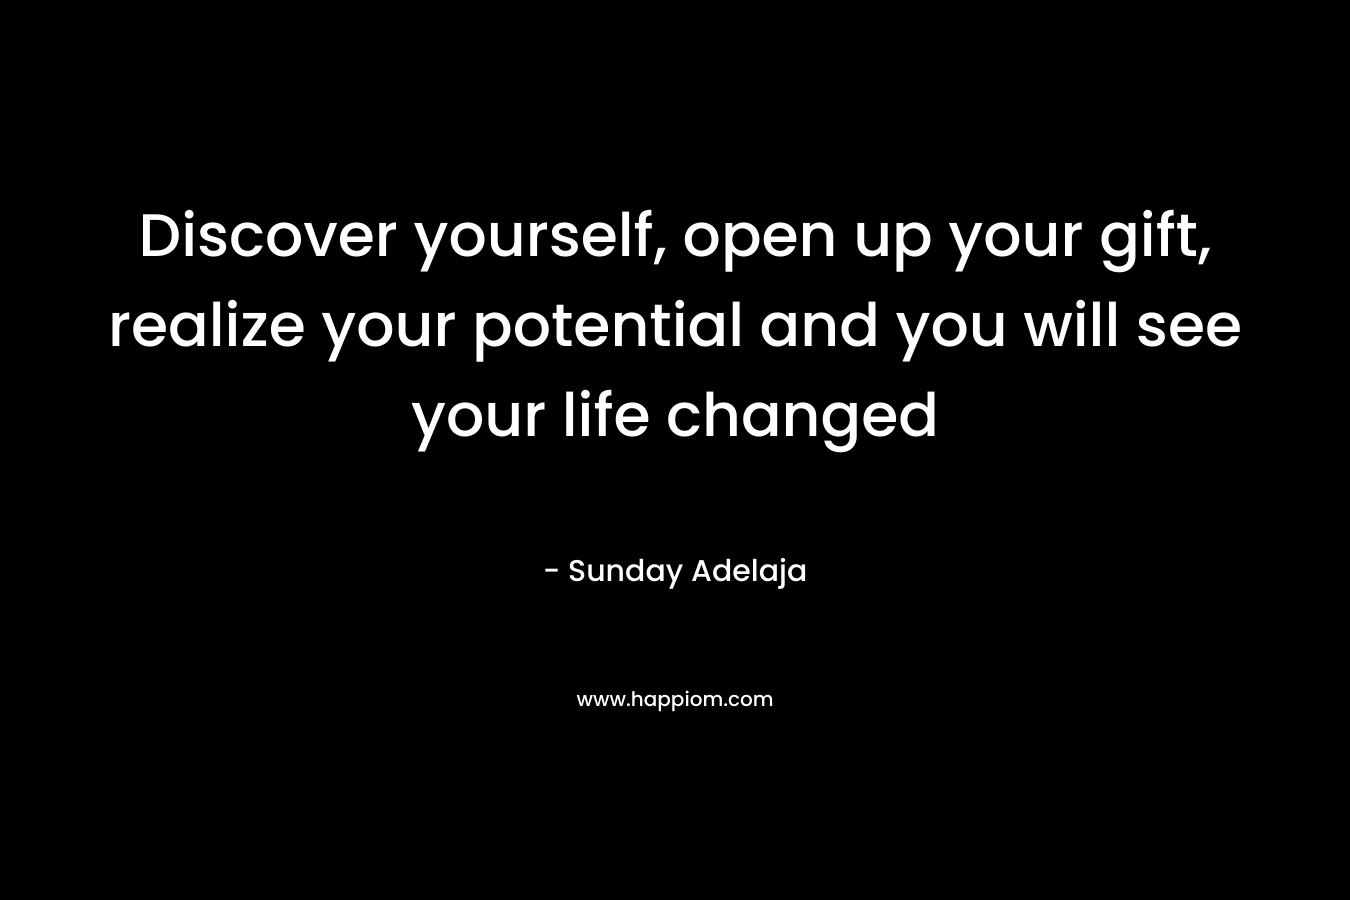 Discover yourself, open up your gift, realize your potential and you will see your life changed